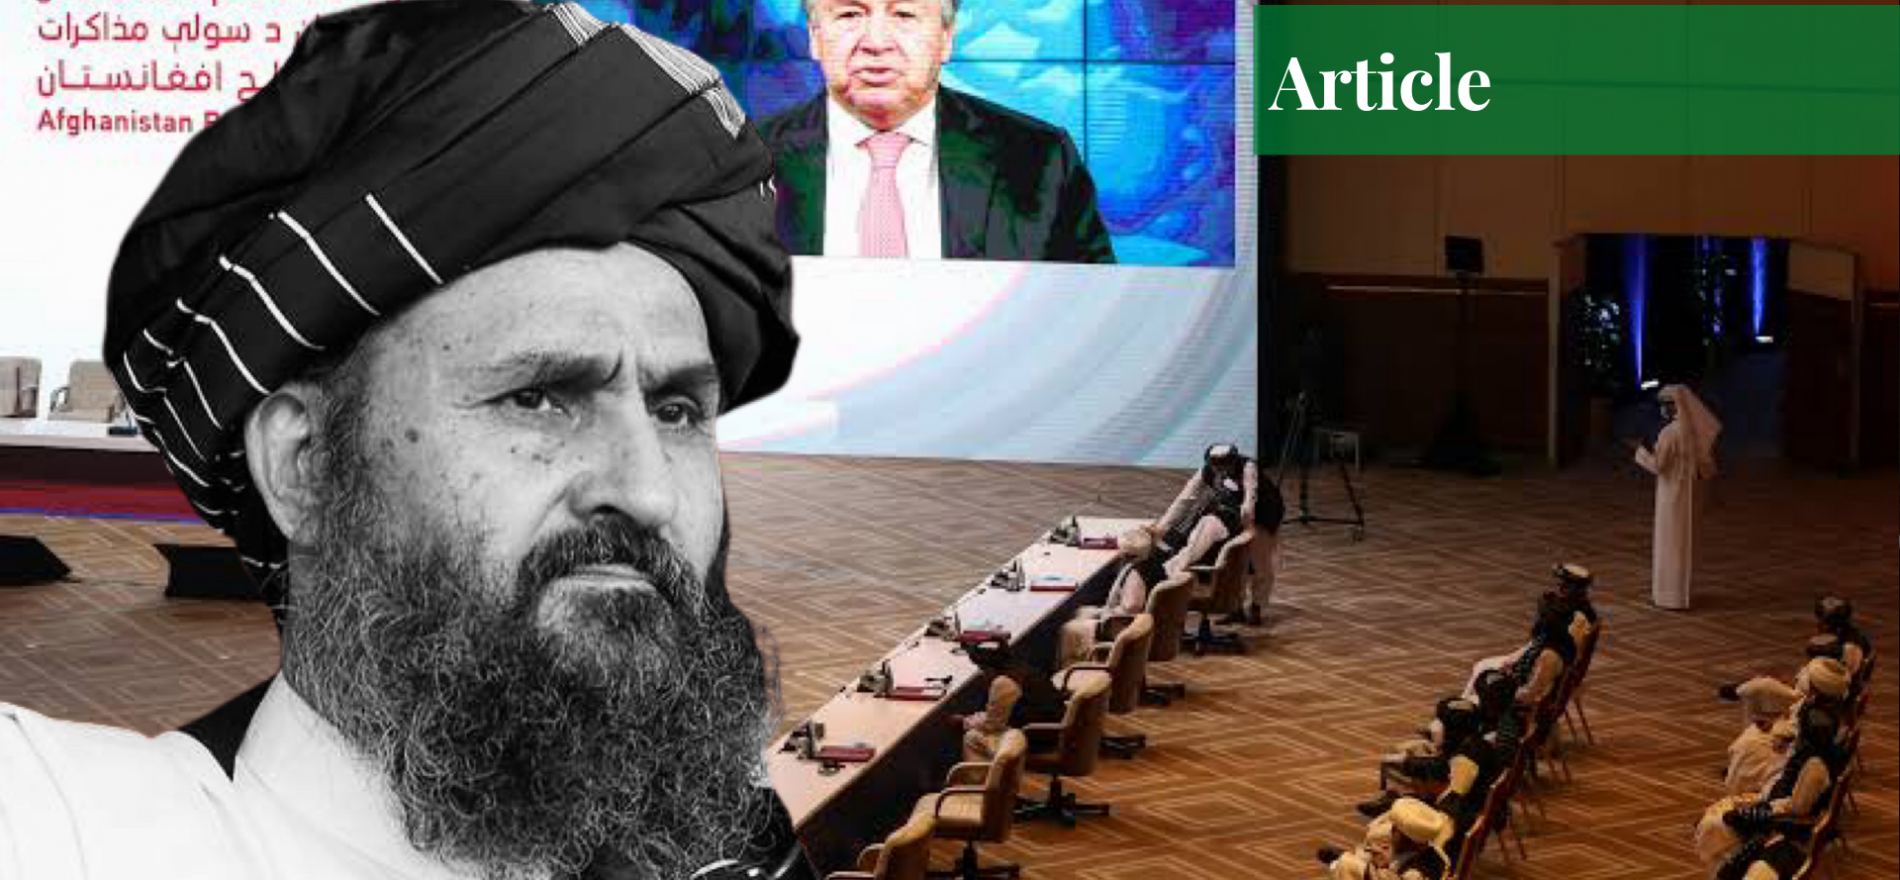 intra-Afghan peace process